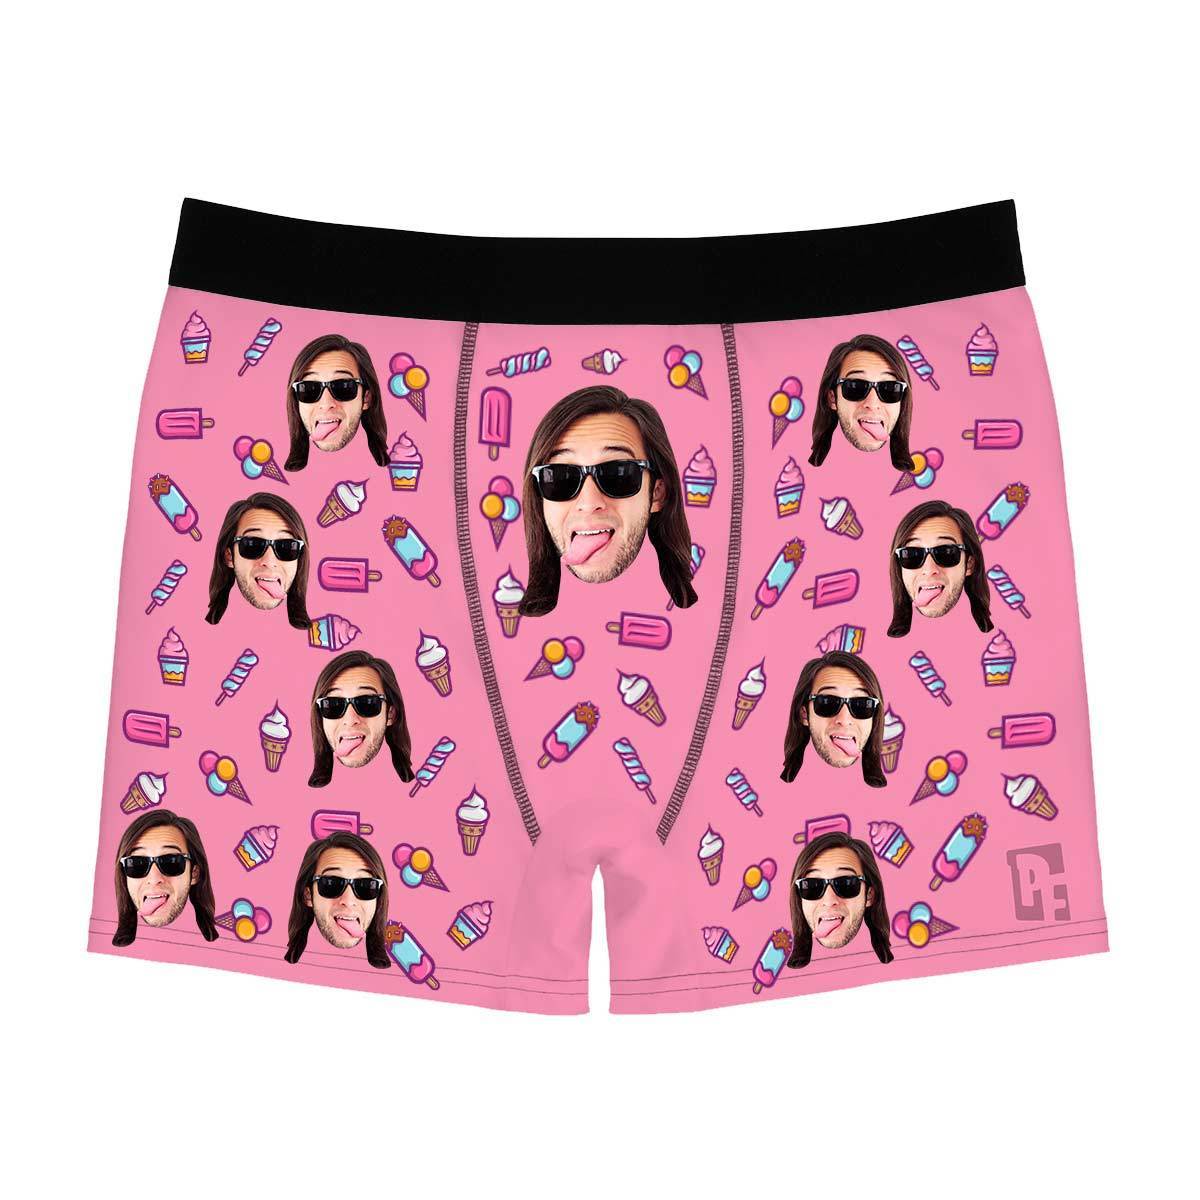 Pink Candies men's boxer briefs personalized with photo printed on them